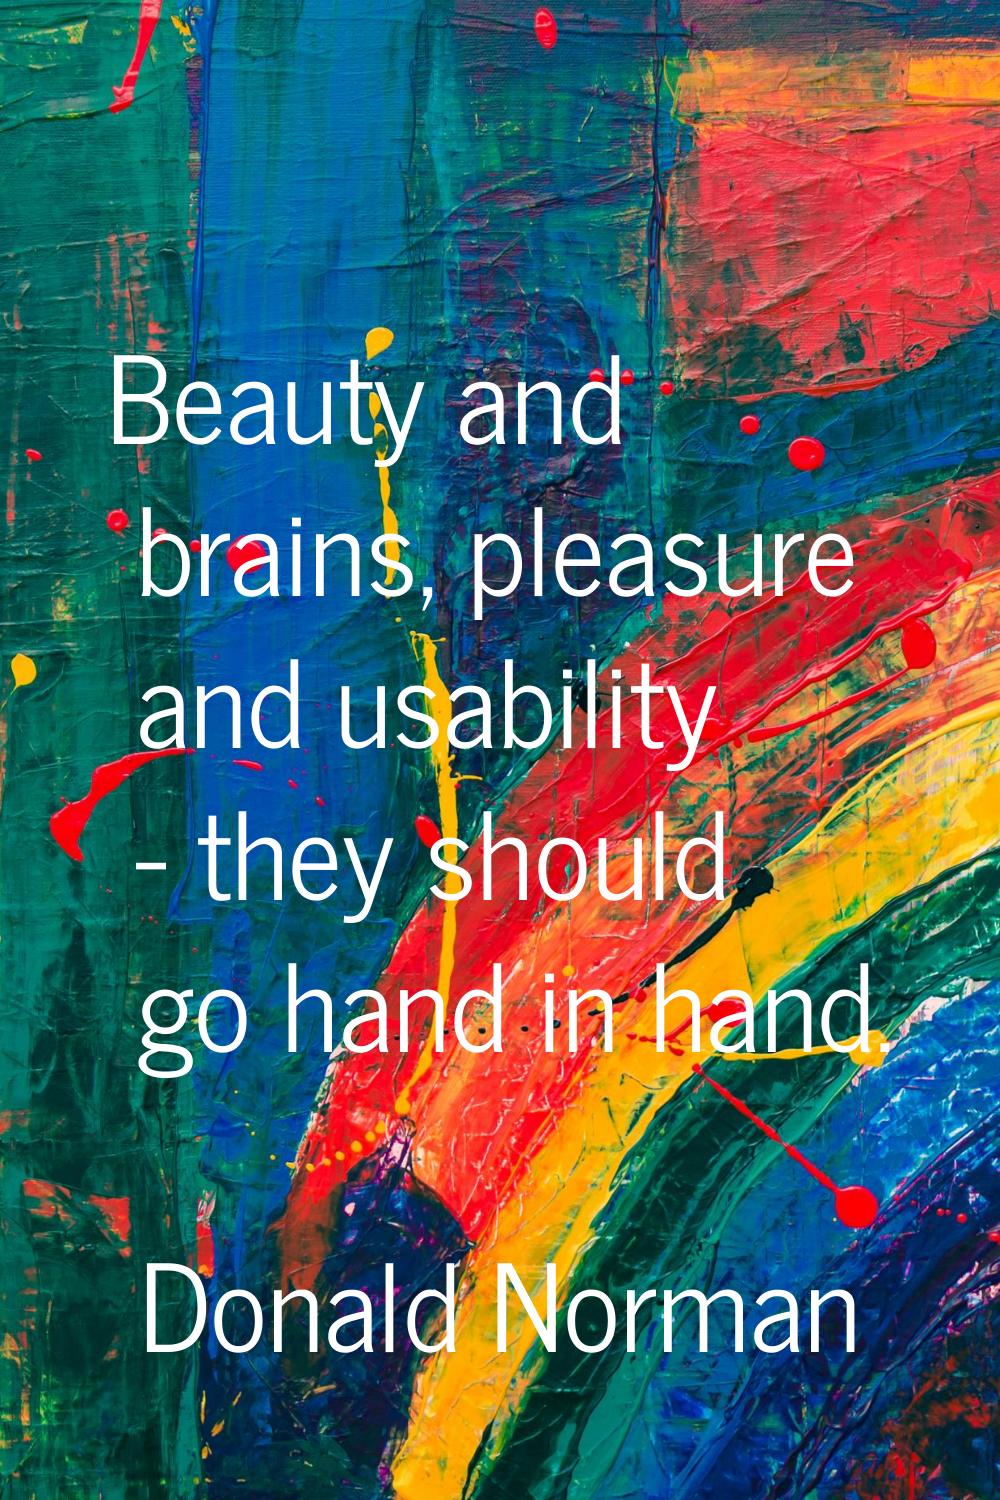 Beauty and brains, pleasure and usability - they should go hand in hand.